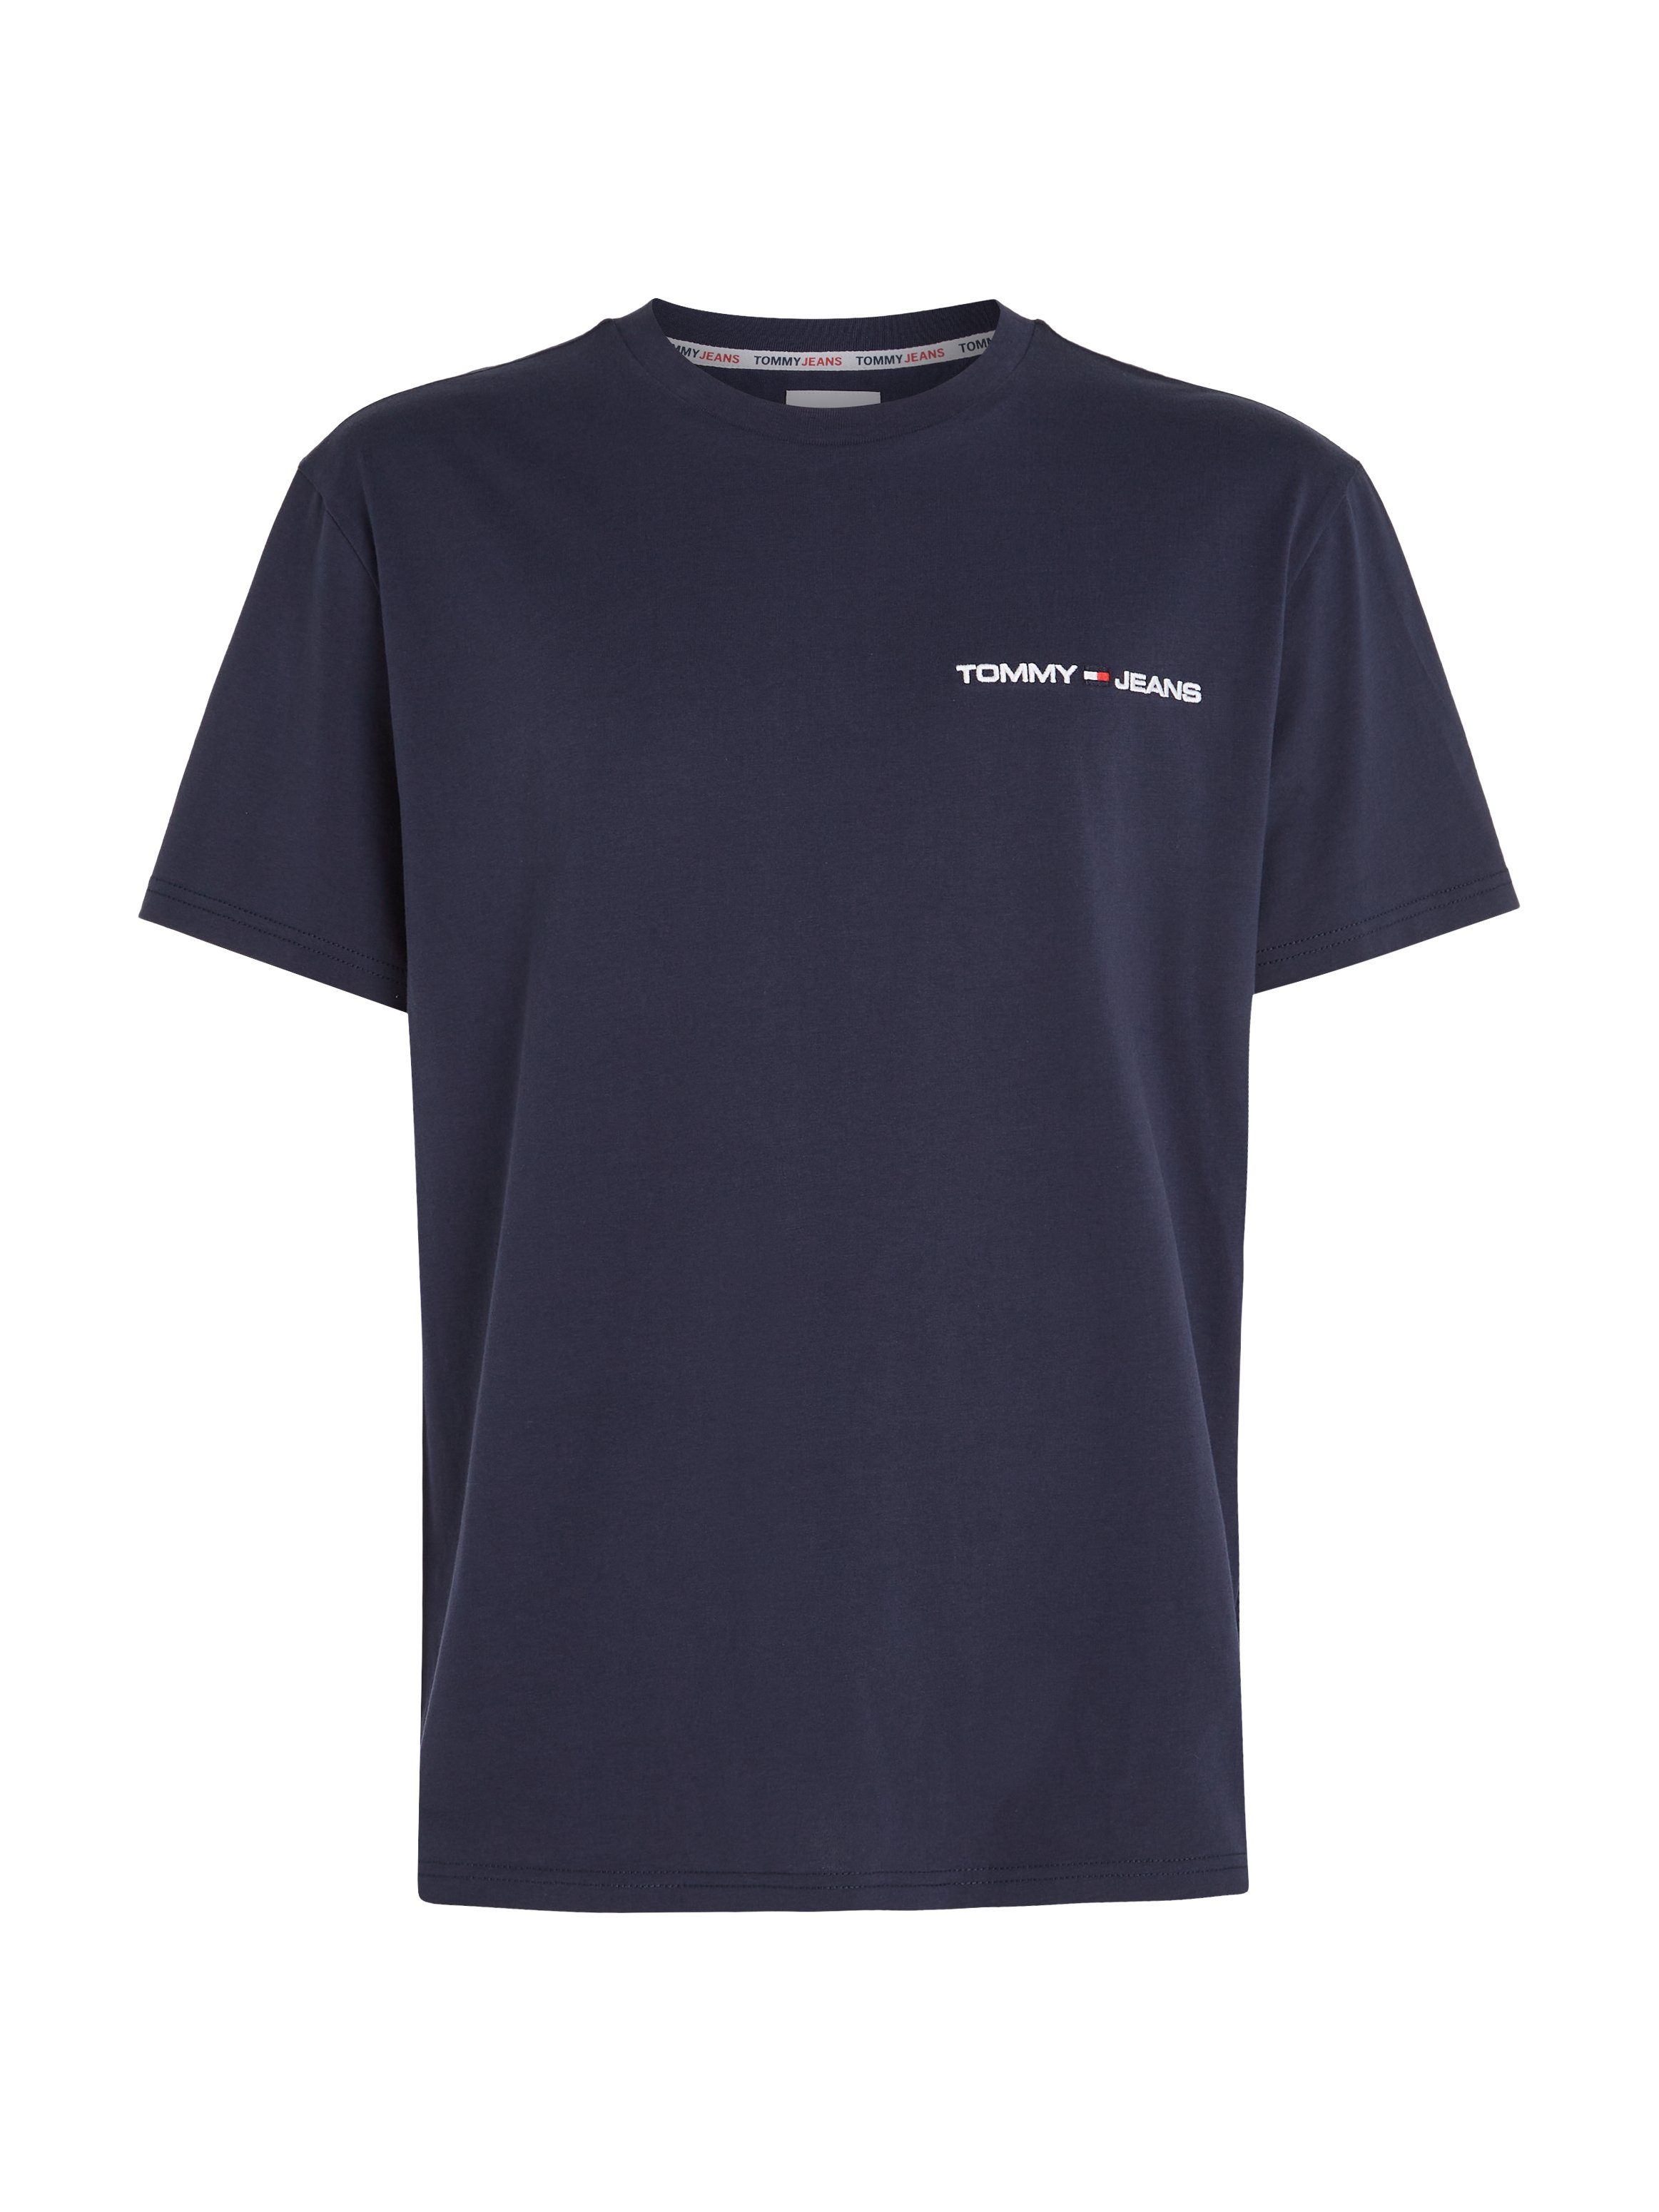 Tommy Jeans T-Shirt TEE CLSC TJM Navy Twilight CHEST LINEAR